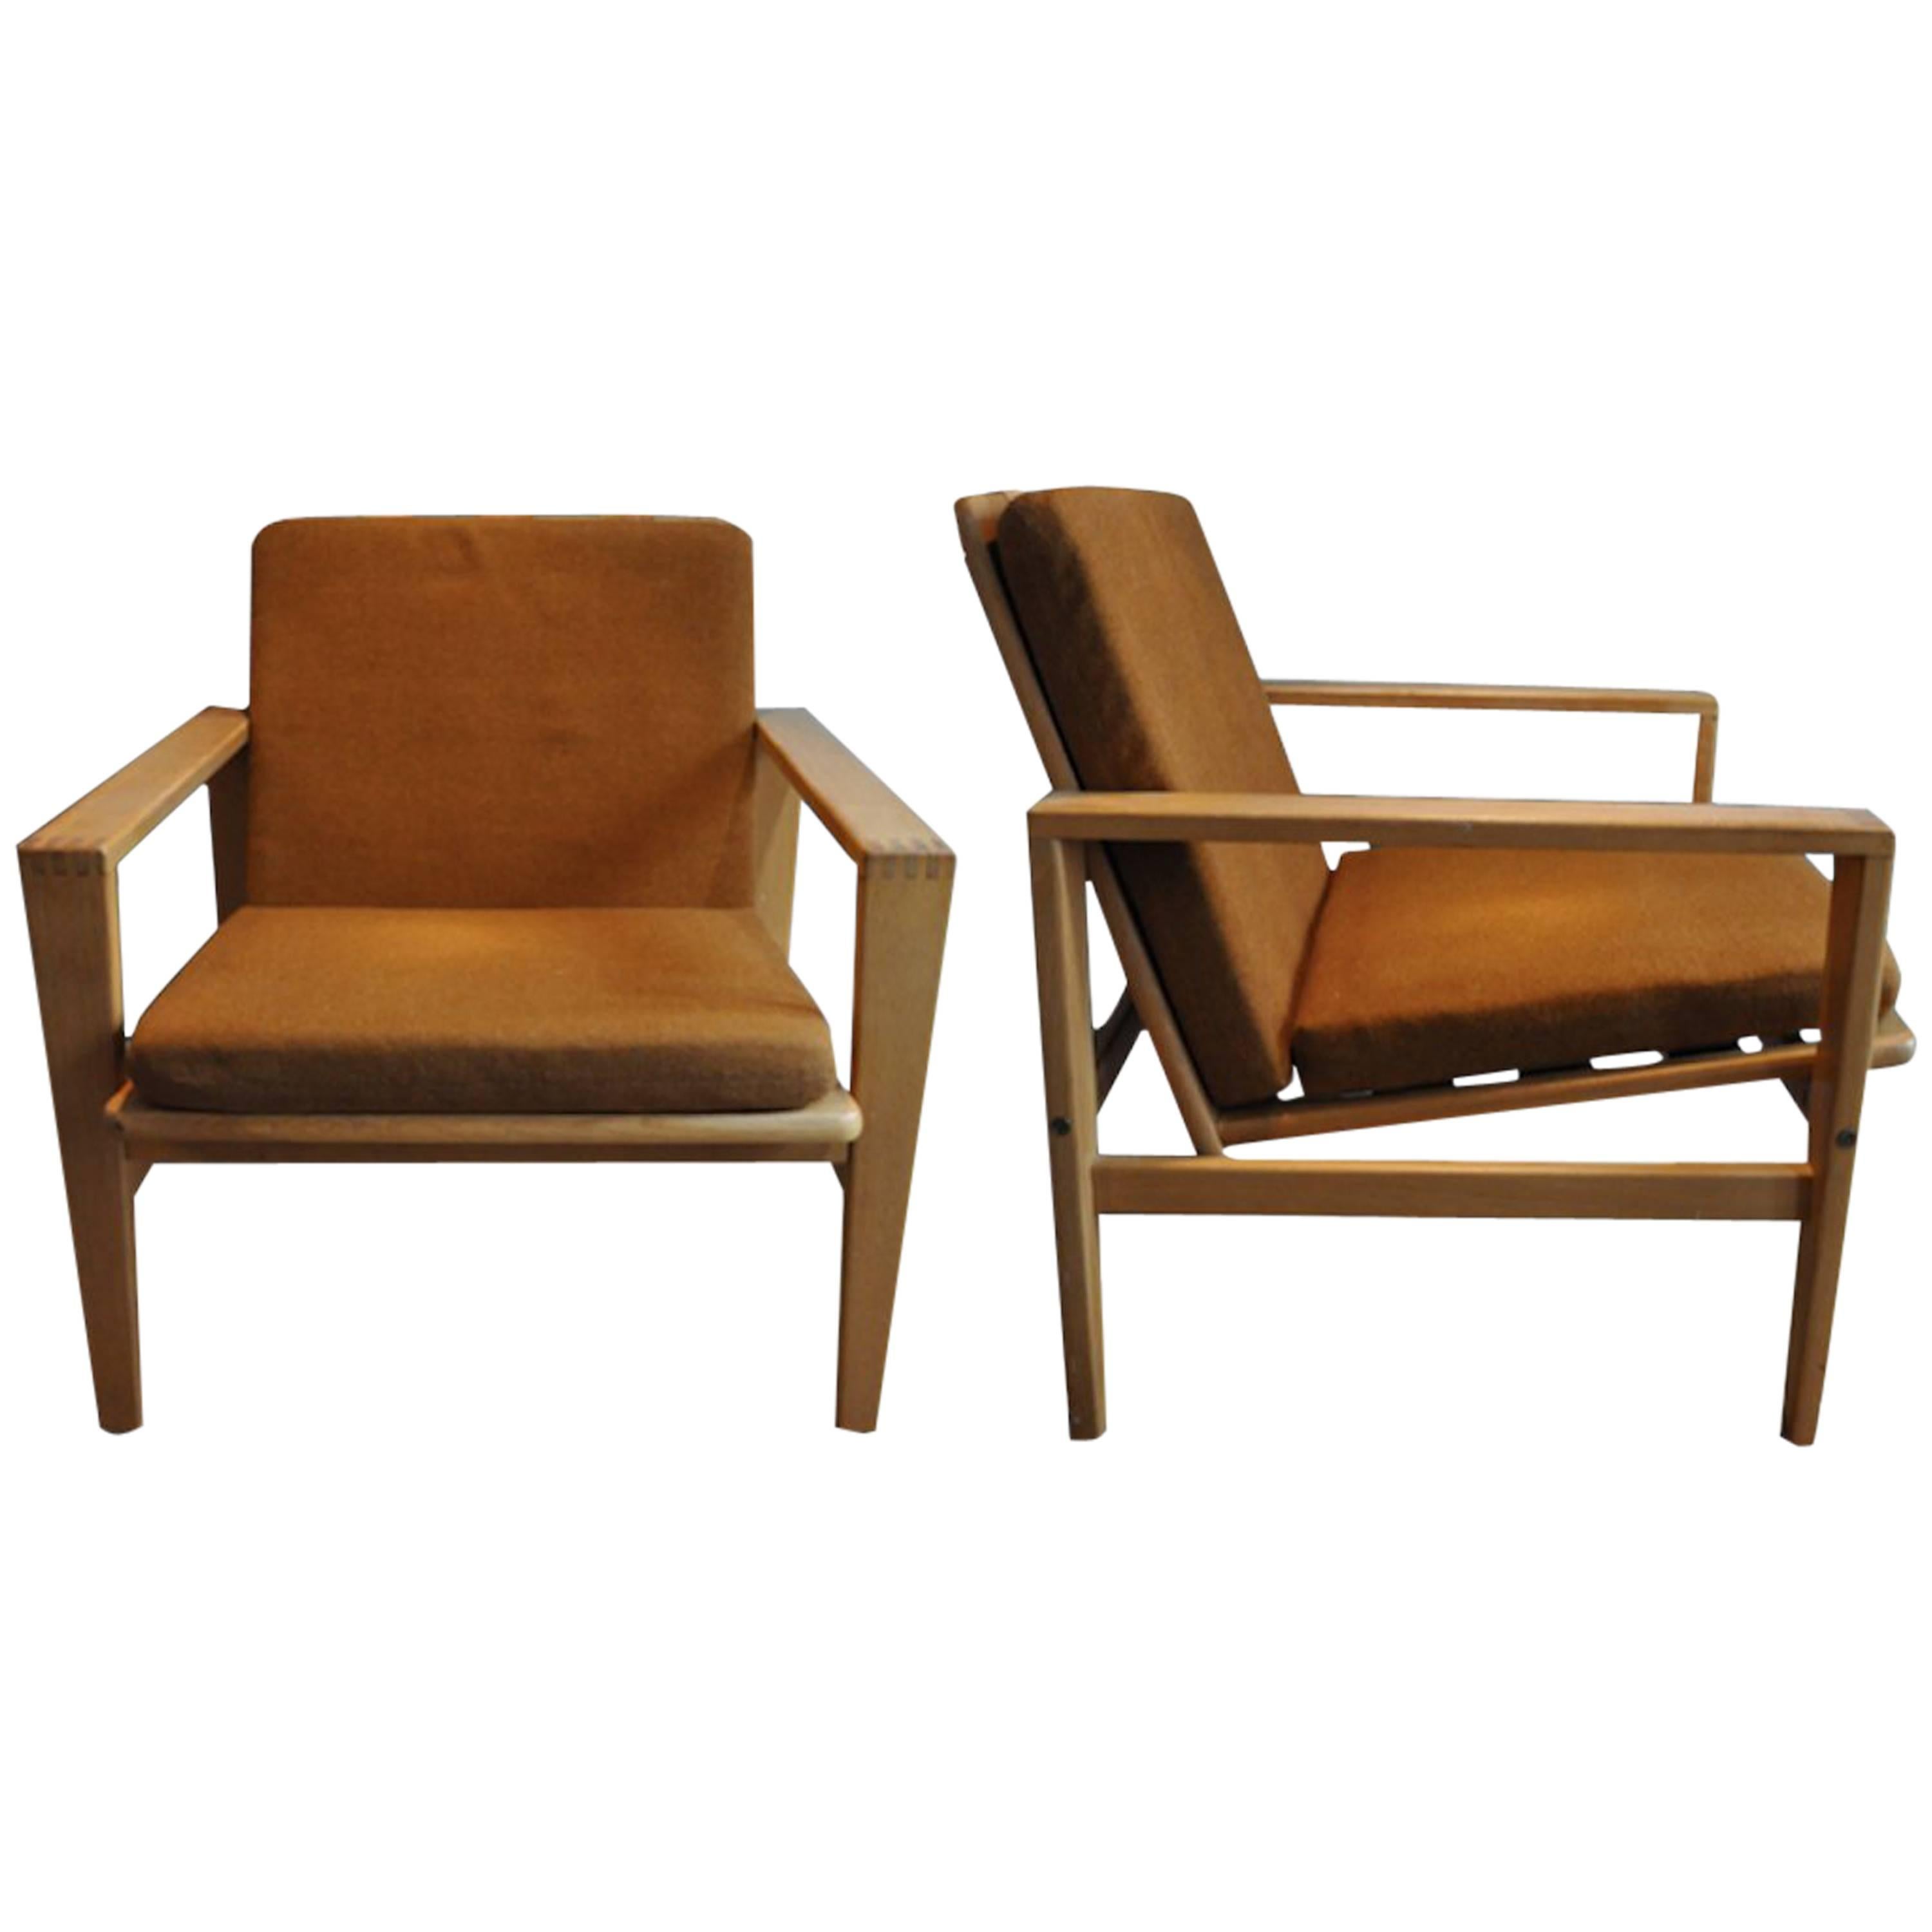 Pair of Armchair Oak and Leather "Tornado" Eric Merthen, 1960